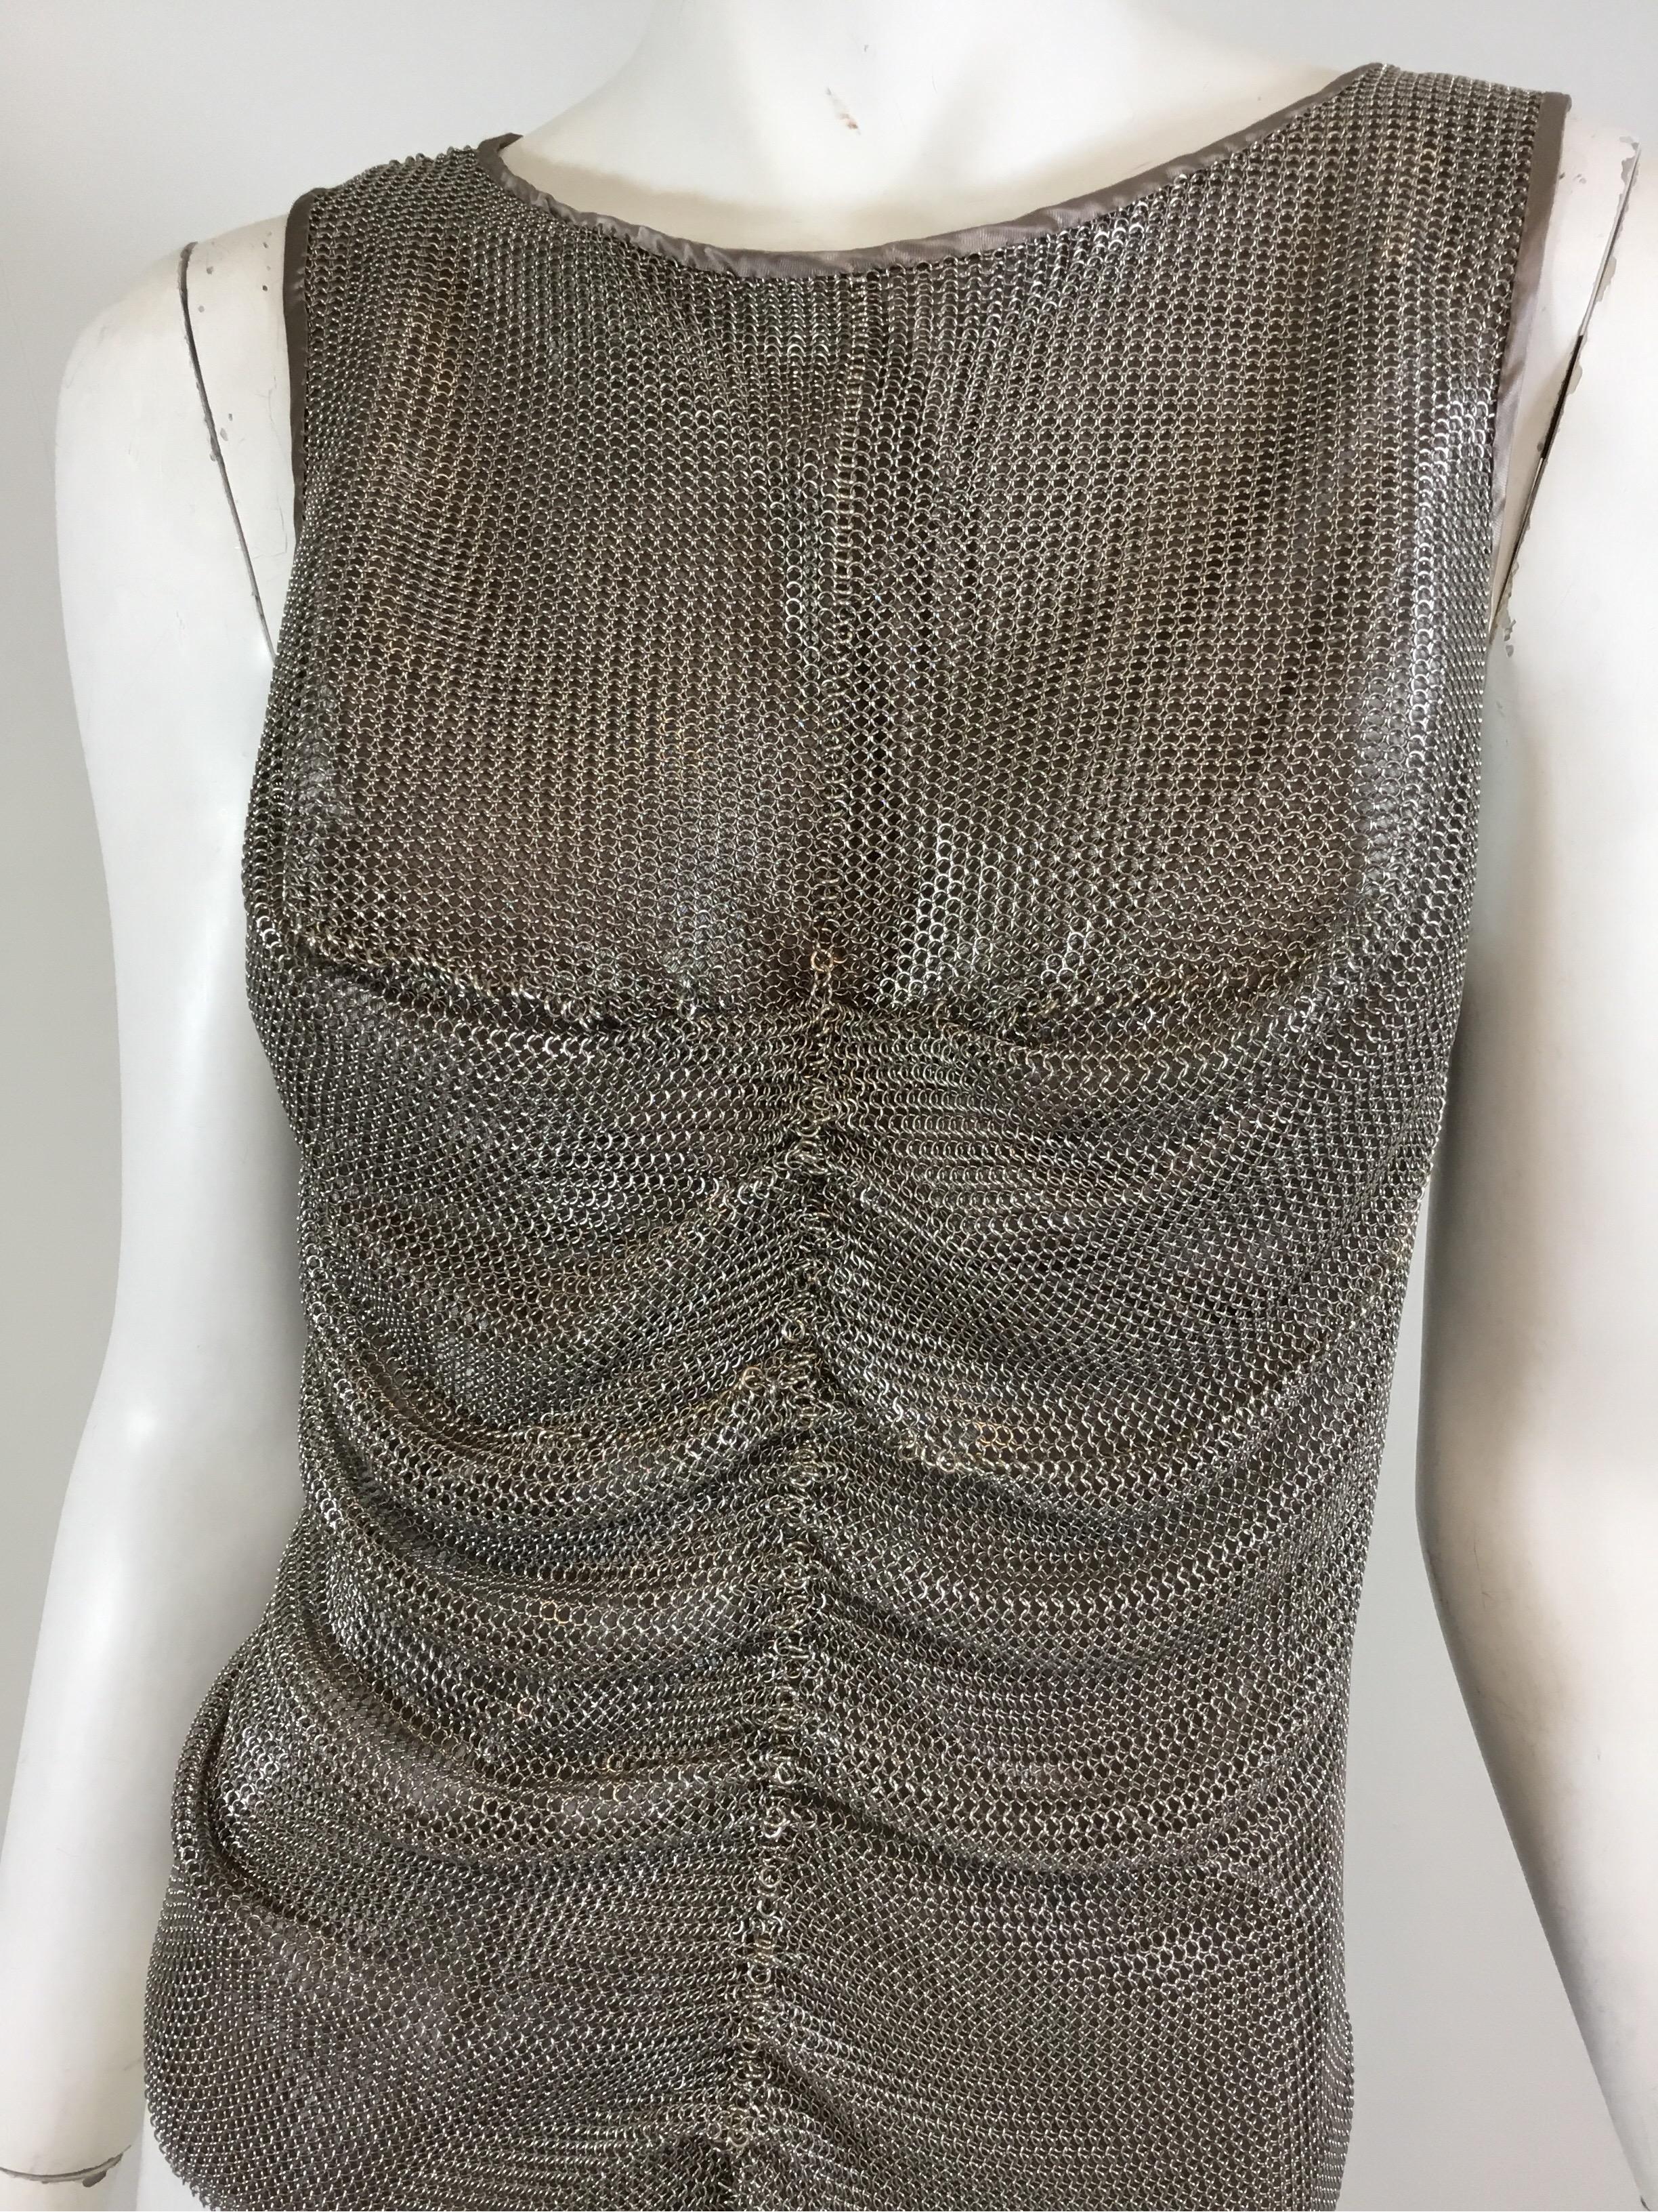 Prada Silver Metal Mesh top with a taupe under layer and full back zipper closure. Labeled Size 40, made in Italy. This top was purchased from Kim Kardashian West’s eBay auction.

Measurements:
Bust 32”, length 20”